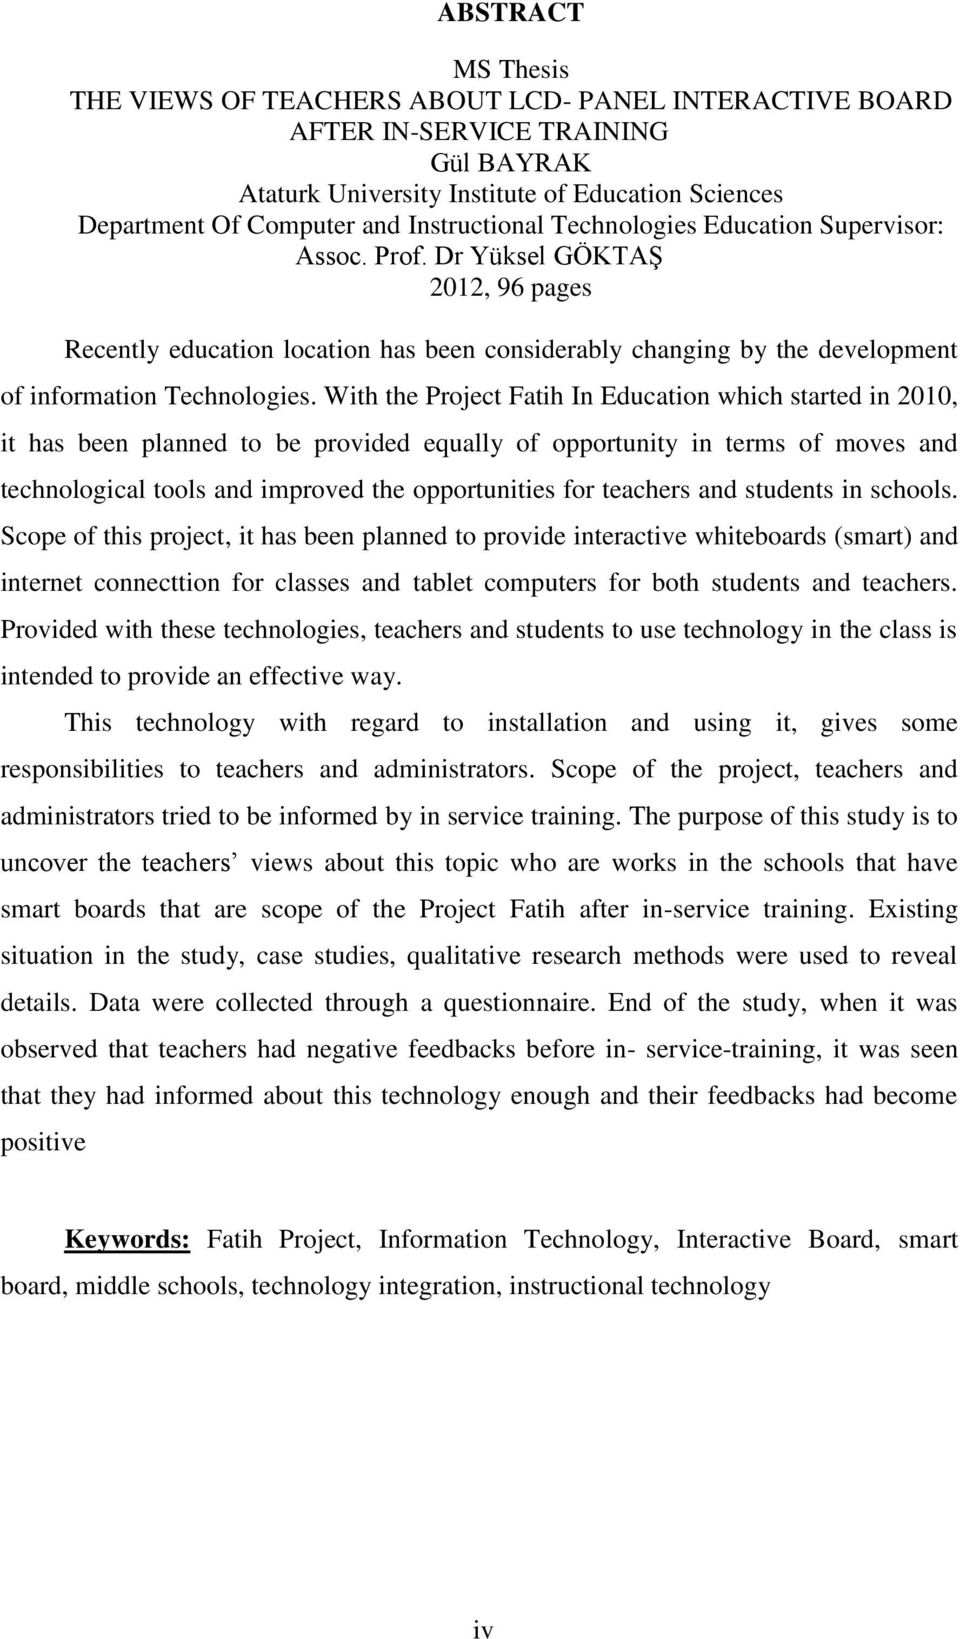 With the Project Fatih In Education which started in 2010, it has been planned to be provided equally of opportunity in terms of moves and technological tools and improved the opportunities for